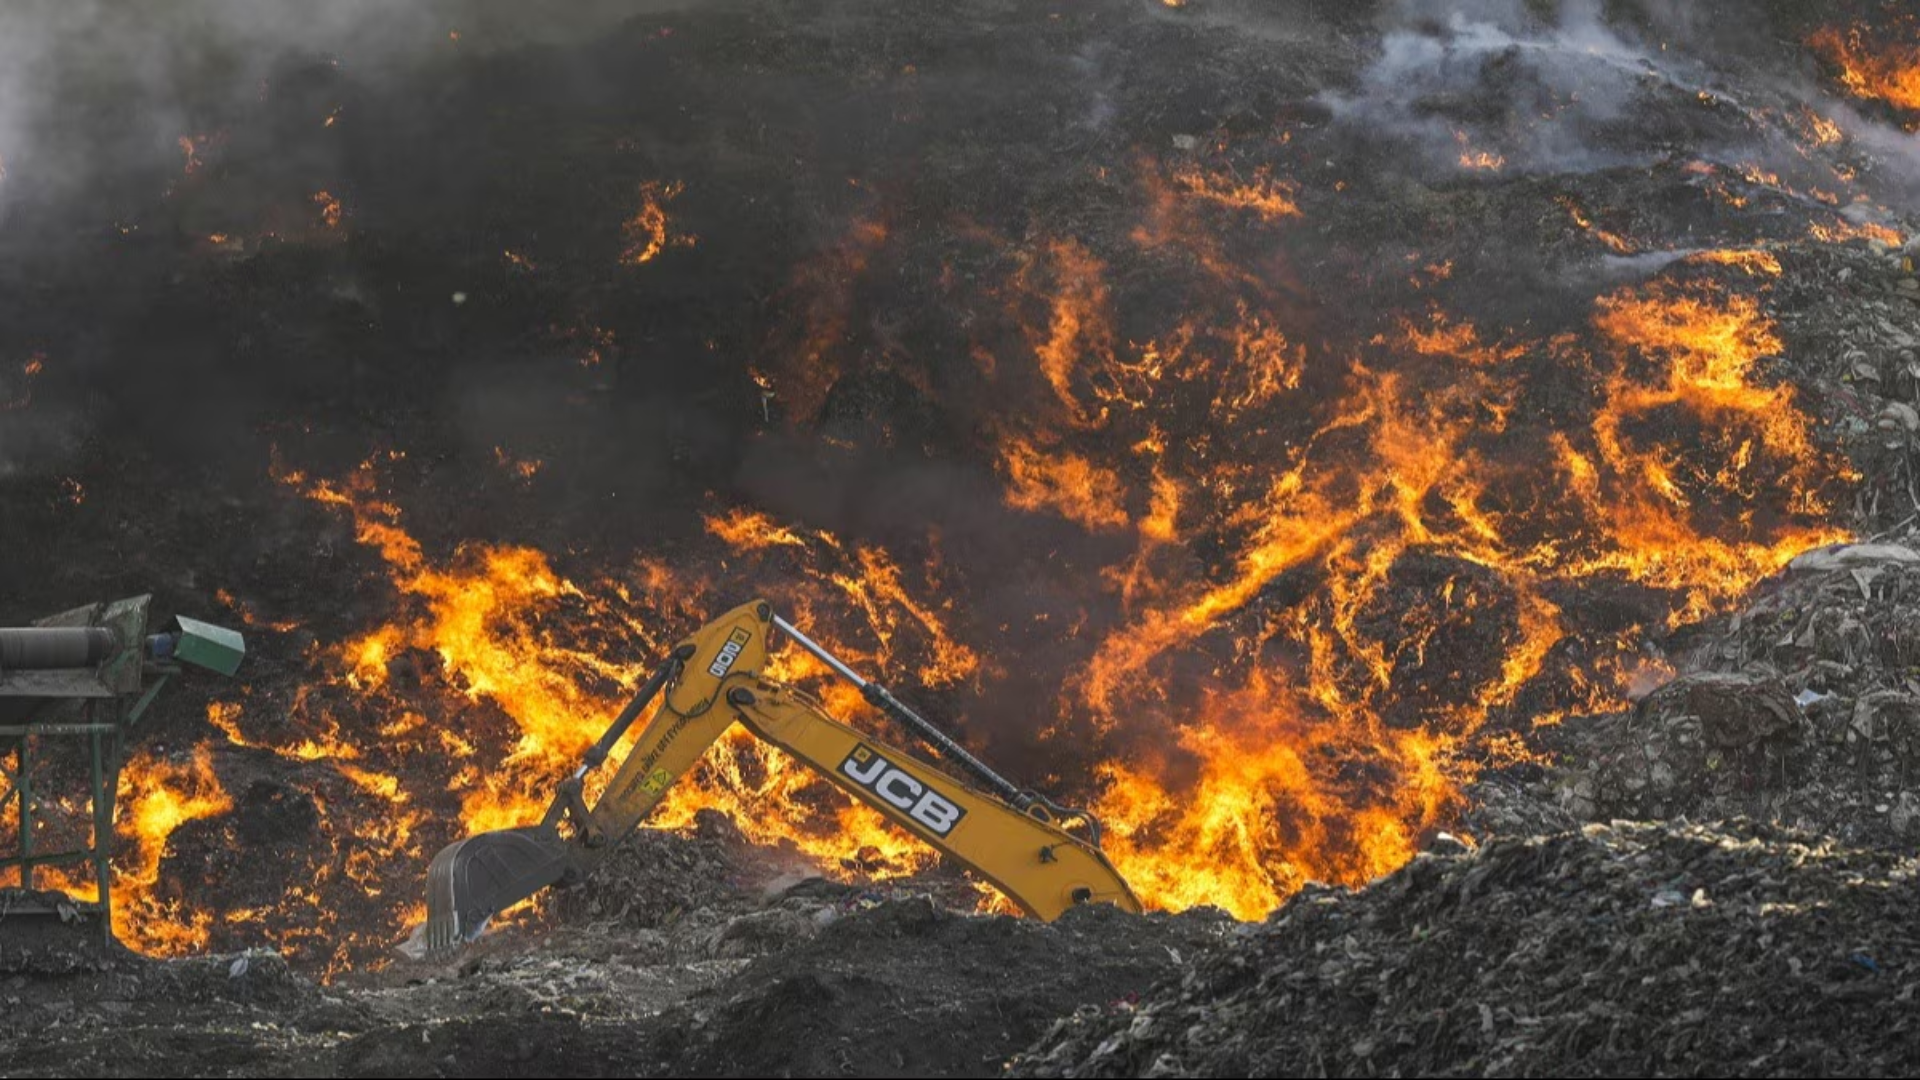 17 Hours Continuous Burning In Gazipur Landfill, ‘Smoke Causing Difficult To Breathe’